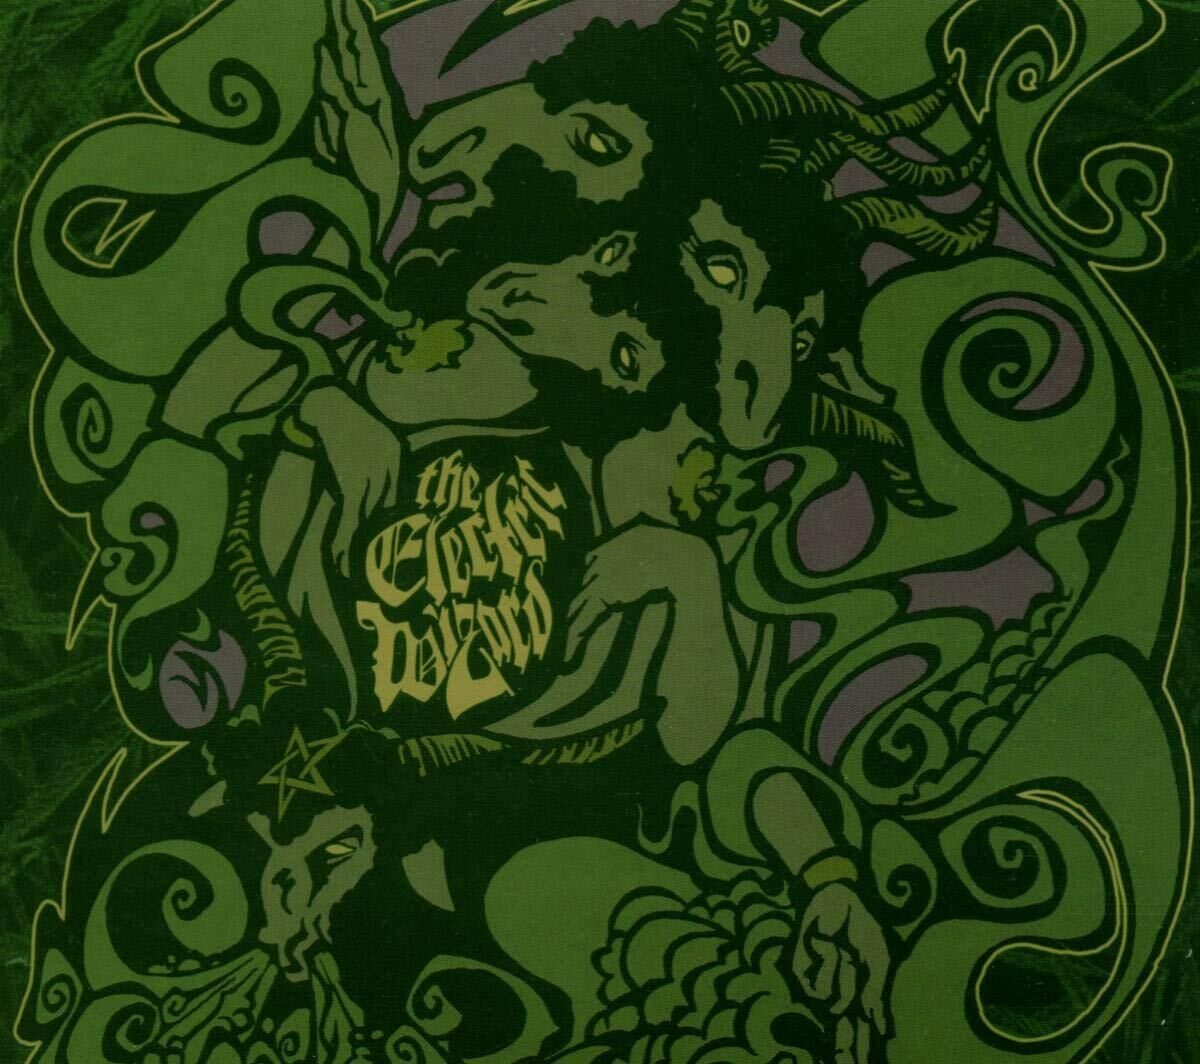 ELECTRIC WIZARD - We Live [RE-RELEASE DIGI]